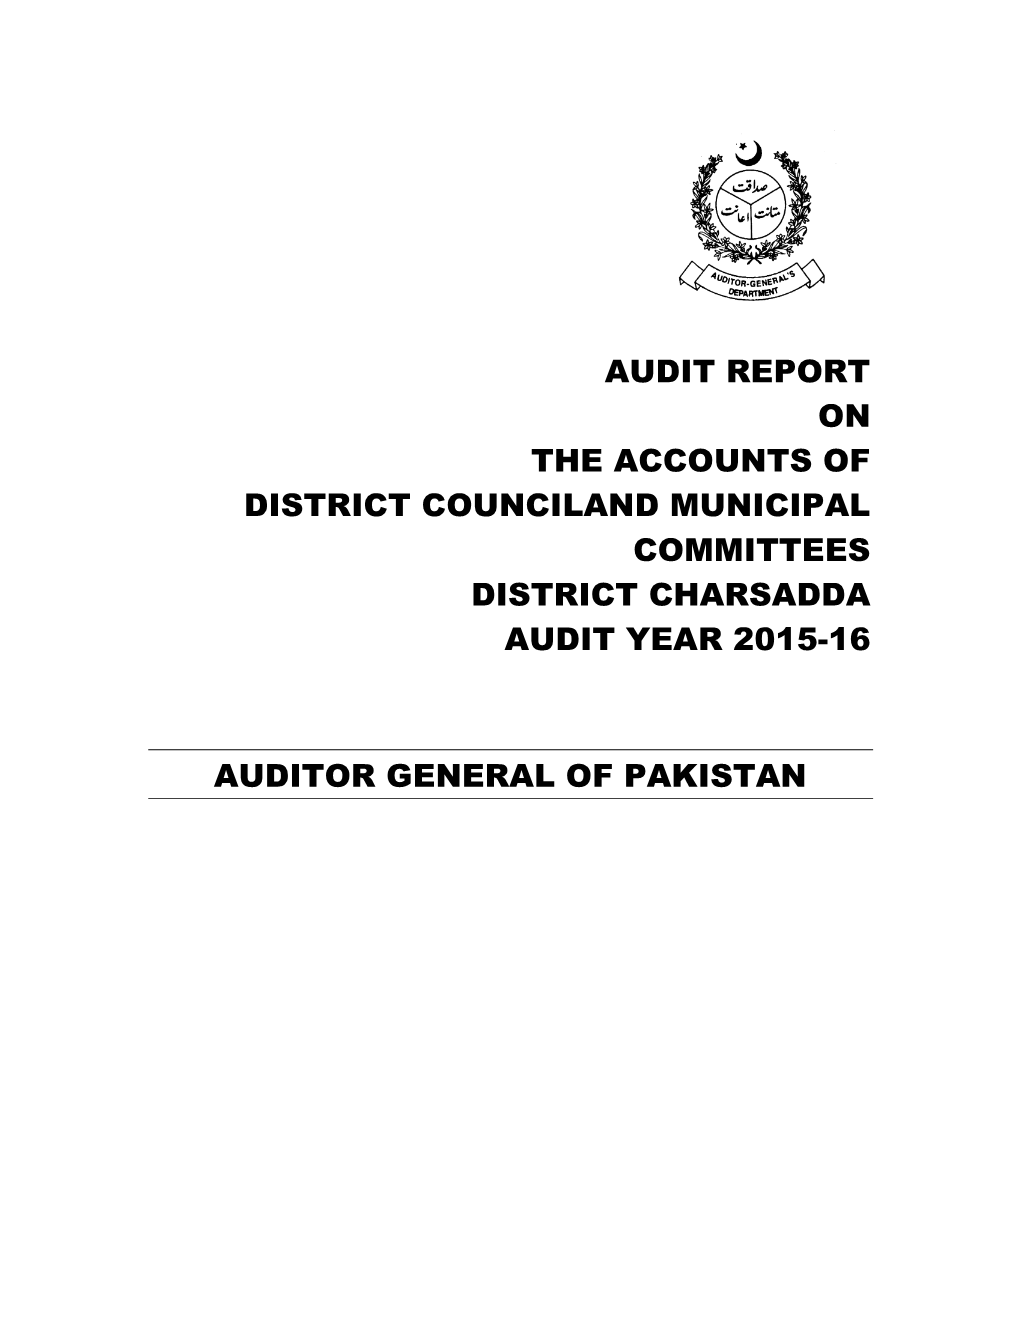 Audit Report on the Accounts of District Counciland Municipal Committees District Charsadda Audit Year 2015-16